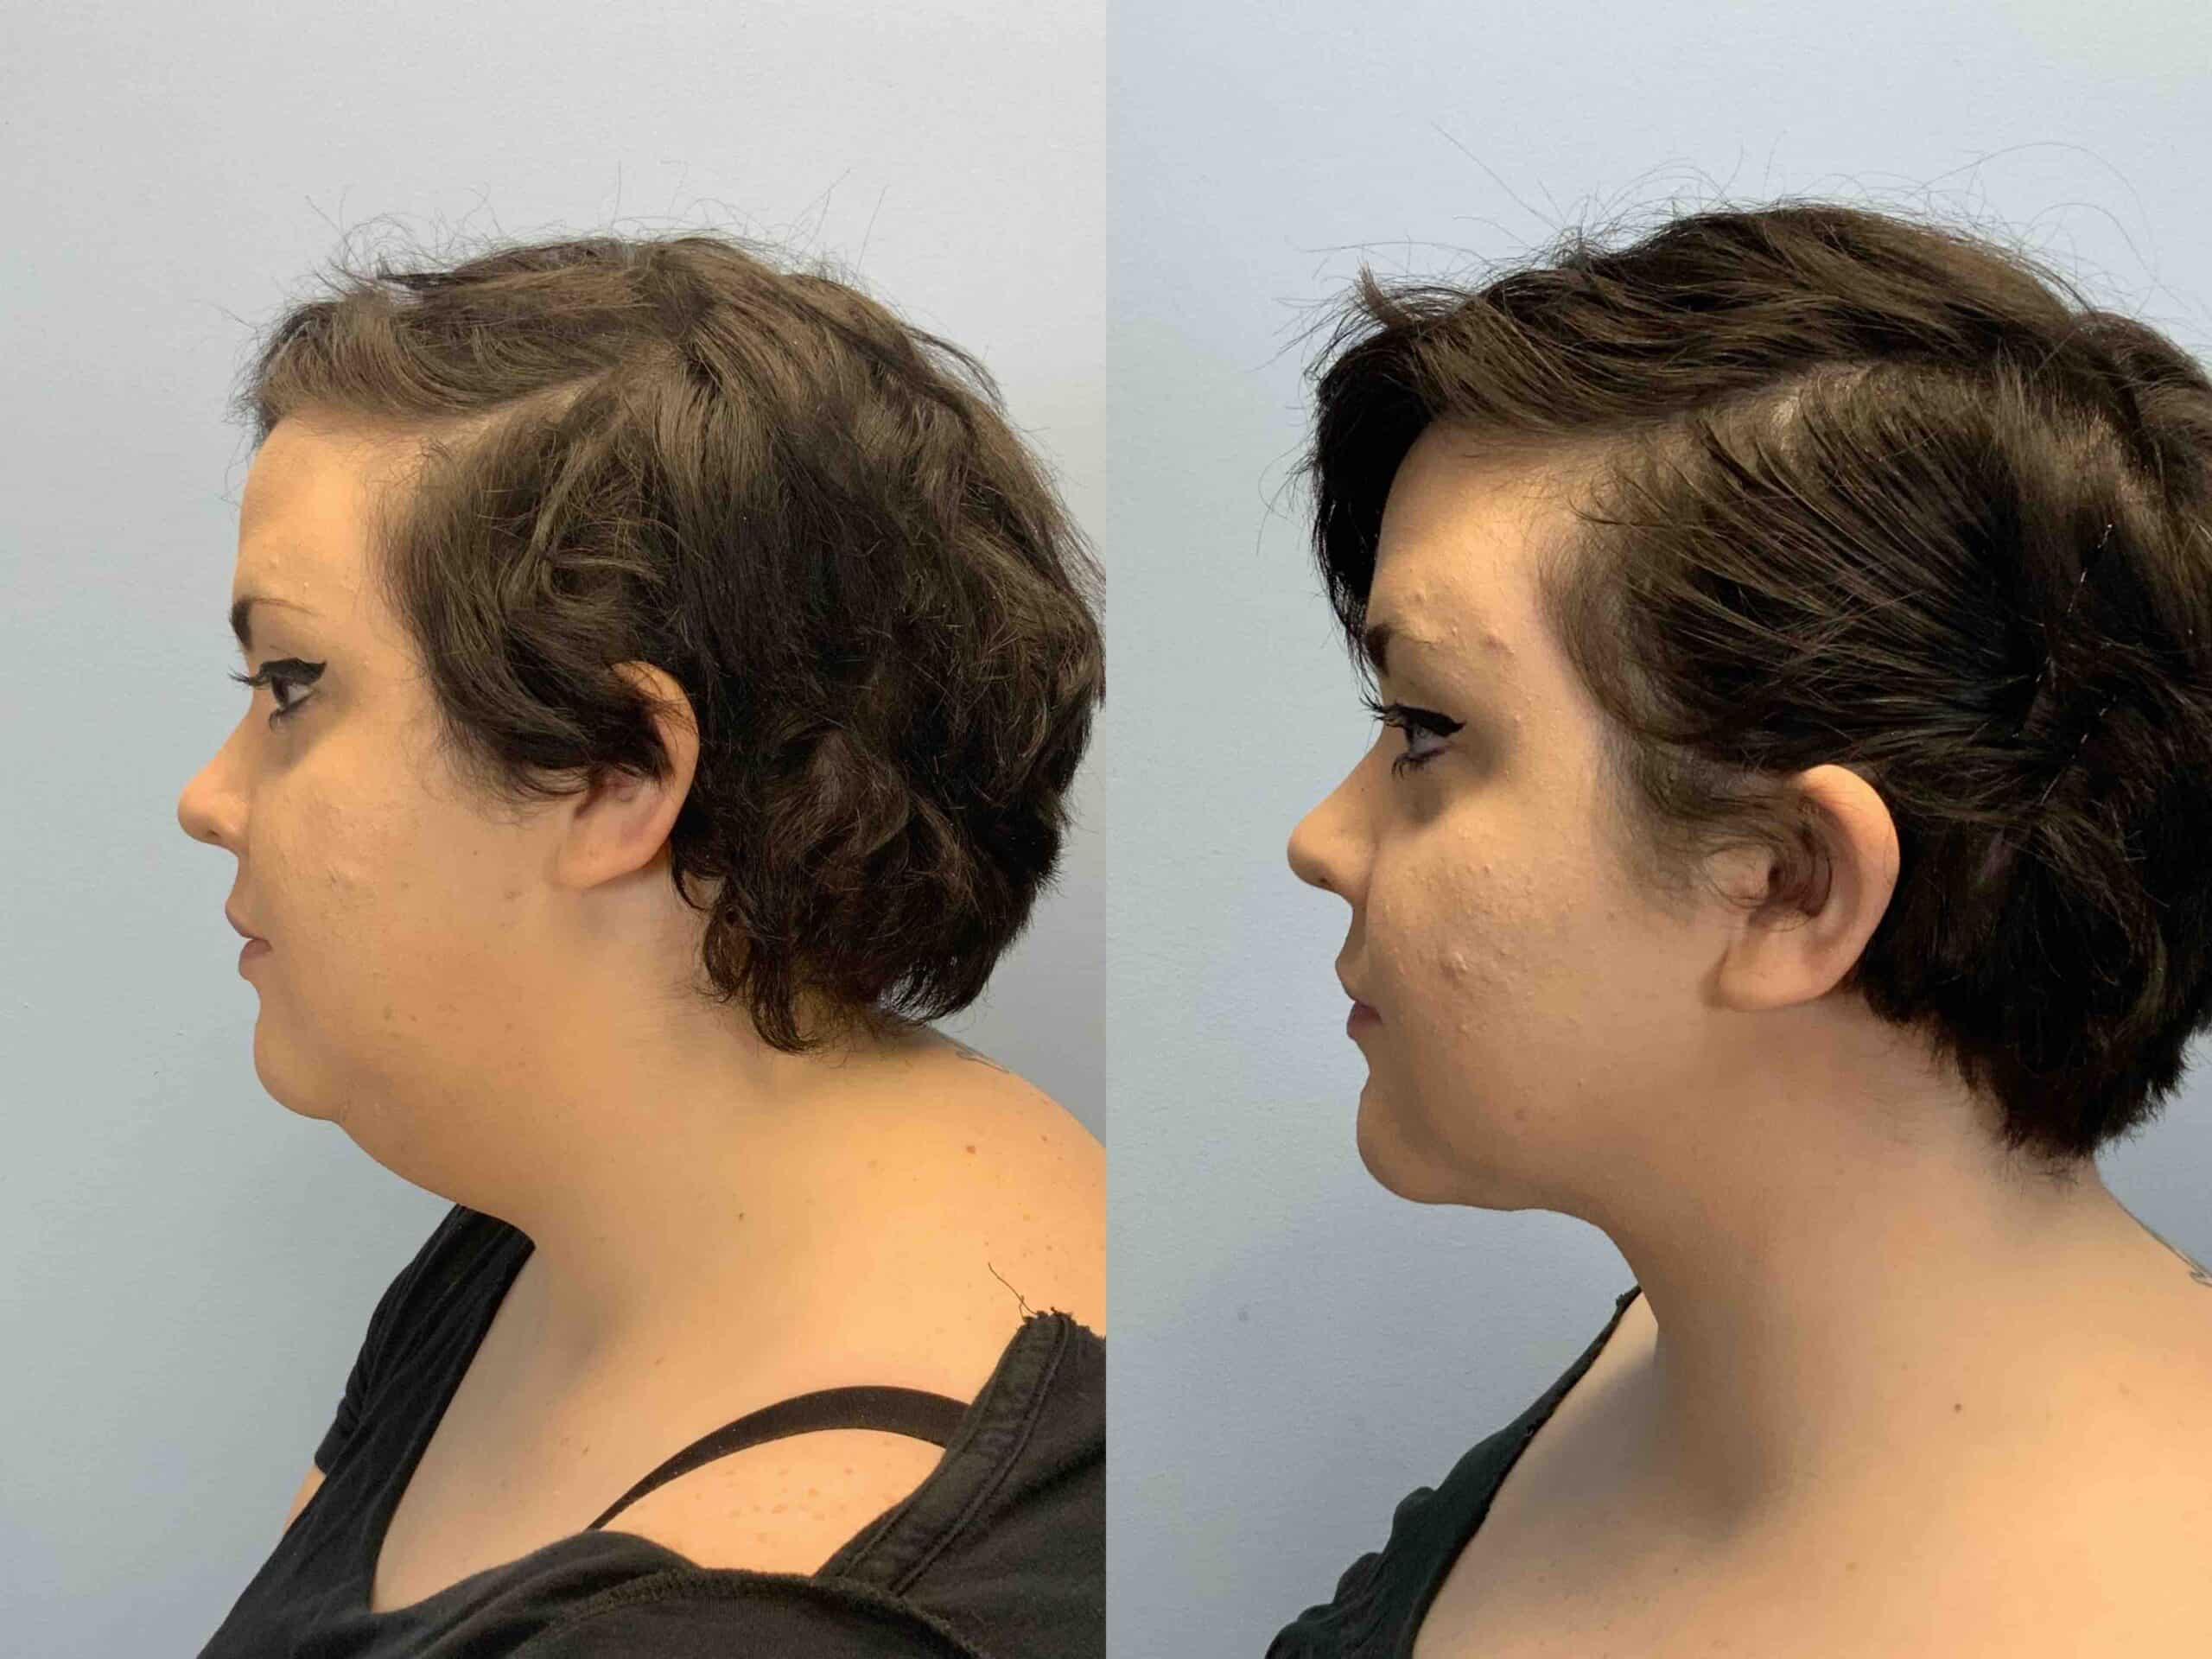 Before and after, 2 mo post op from Neck Lift performed by Dr. Paul Vanek (side view)